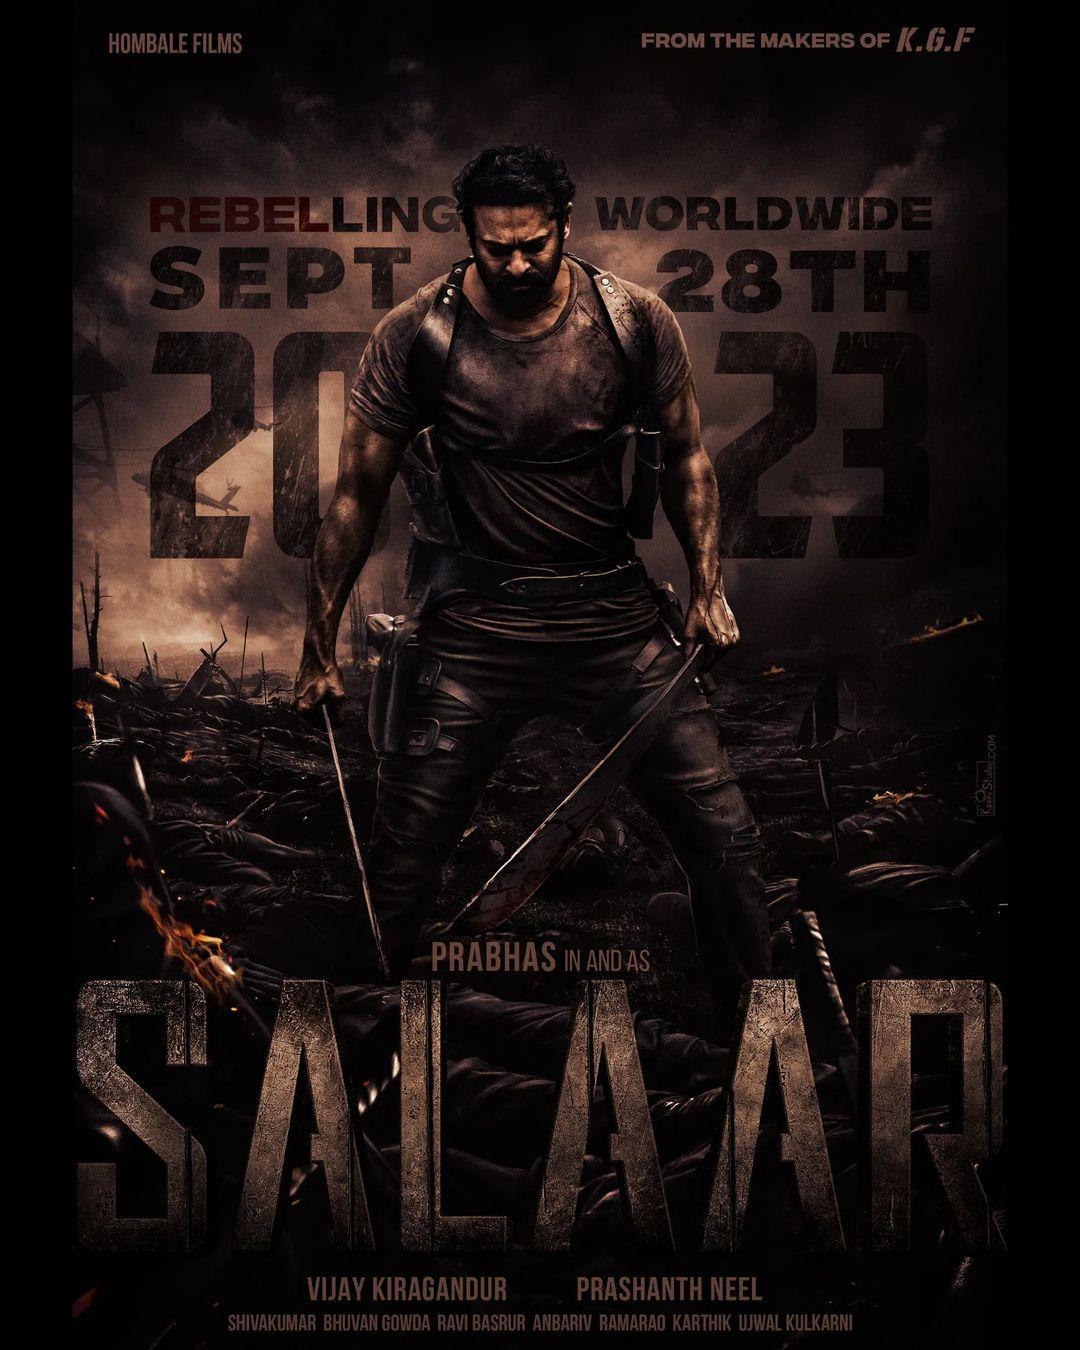 The release date of Salaar was subsequently postponed to September 2023. Sharing another poster from the film, Prabhas wrote, 